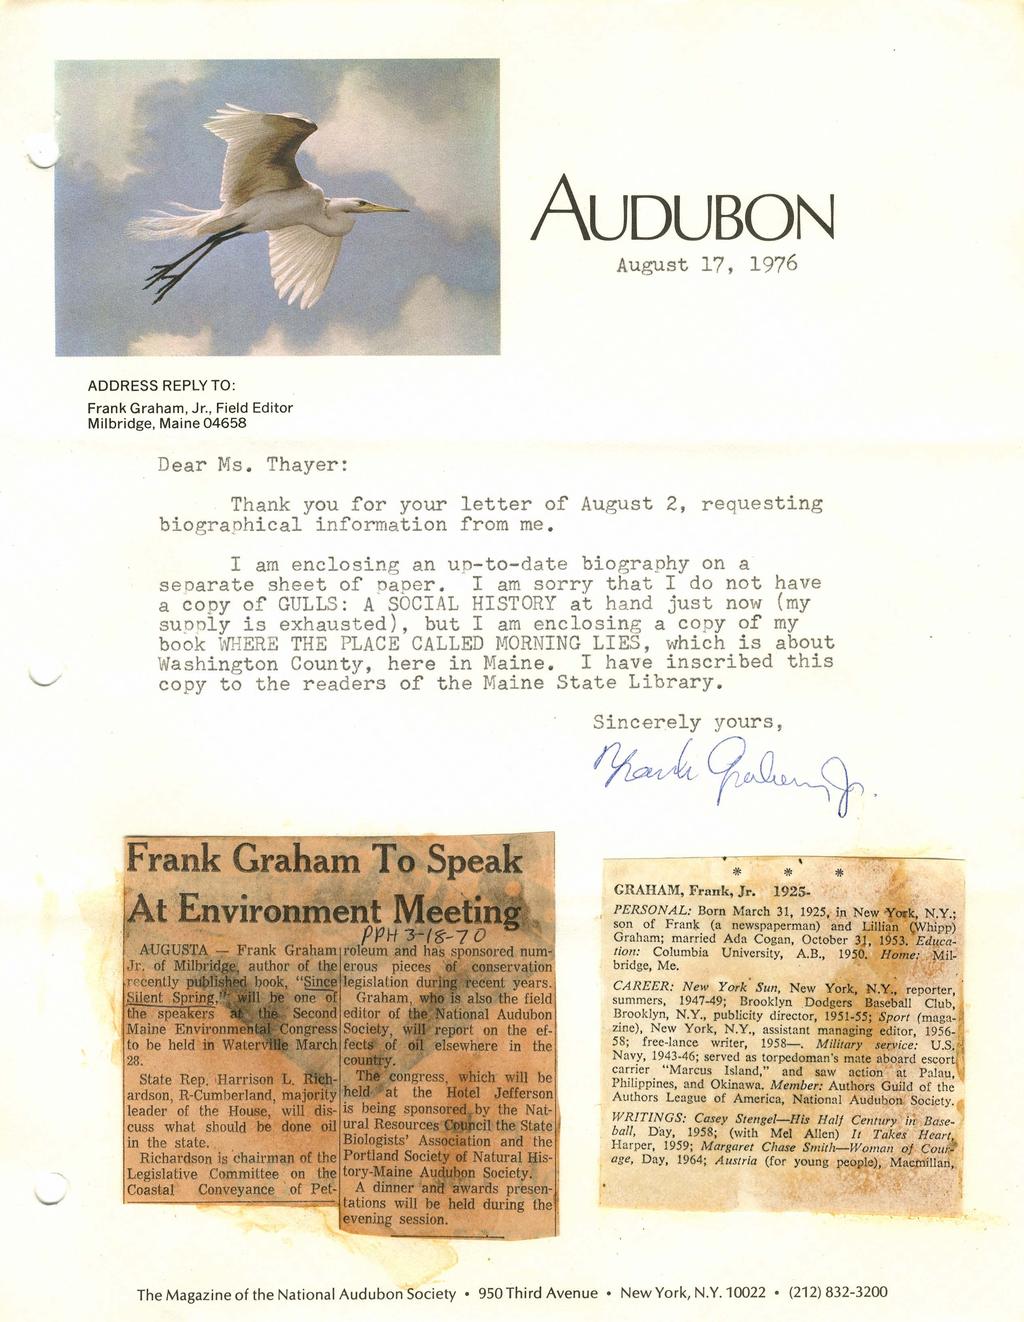 AUDUBON August 17, 1976 ADDRESS REPLY TO: Frank Graham, Jr., Field Editor Milbridge, Maine 04658 Dear Ms. Thayer: Thank you for your letter of August 2, requesting biographical information from me.